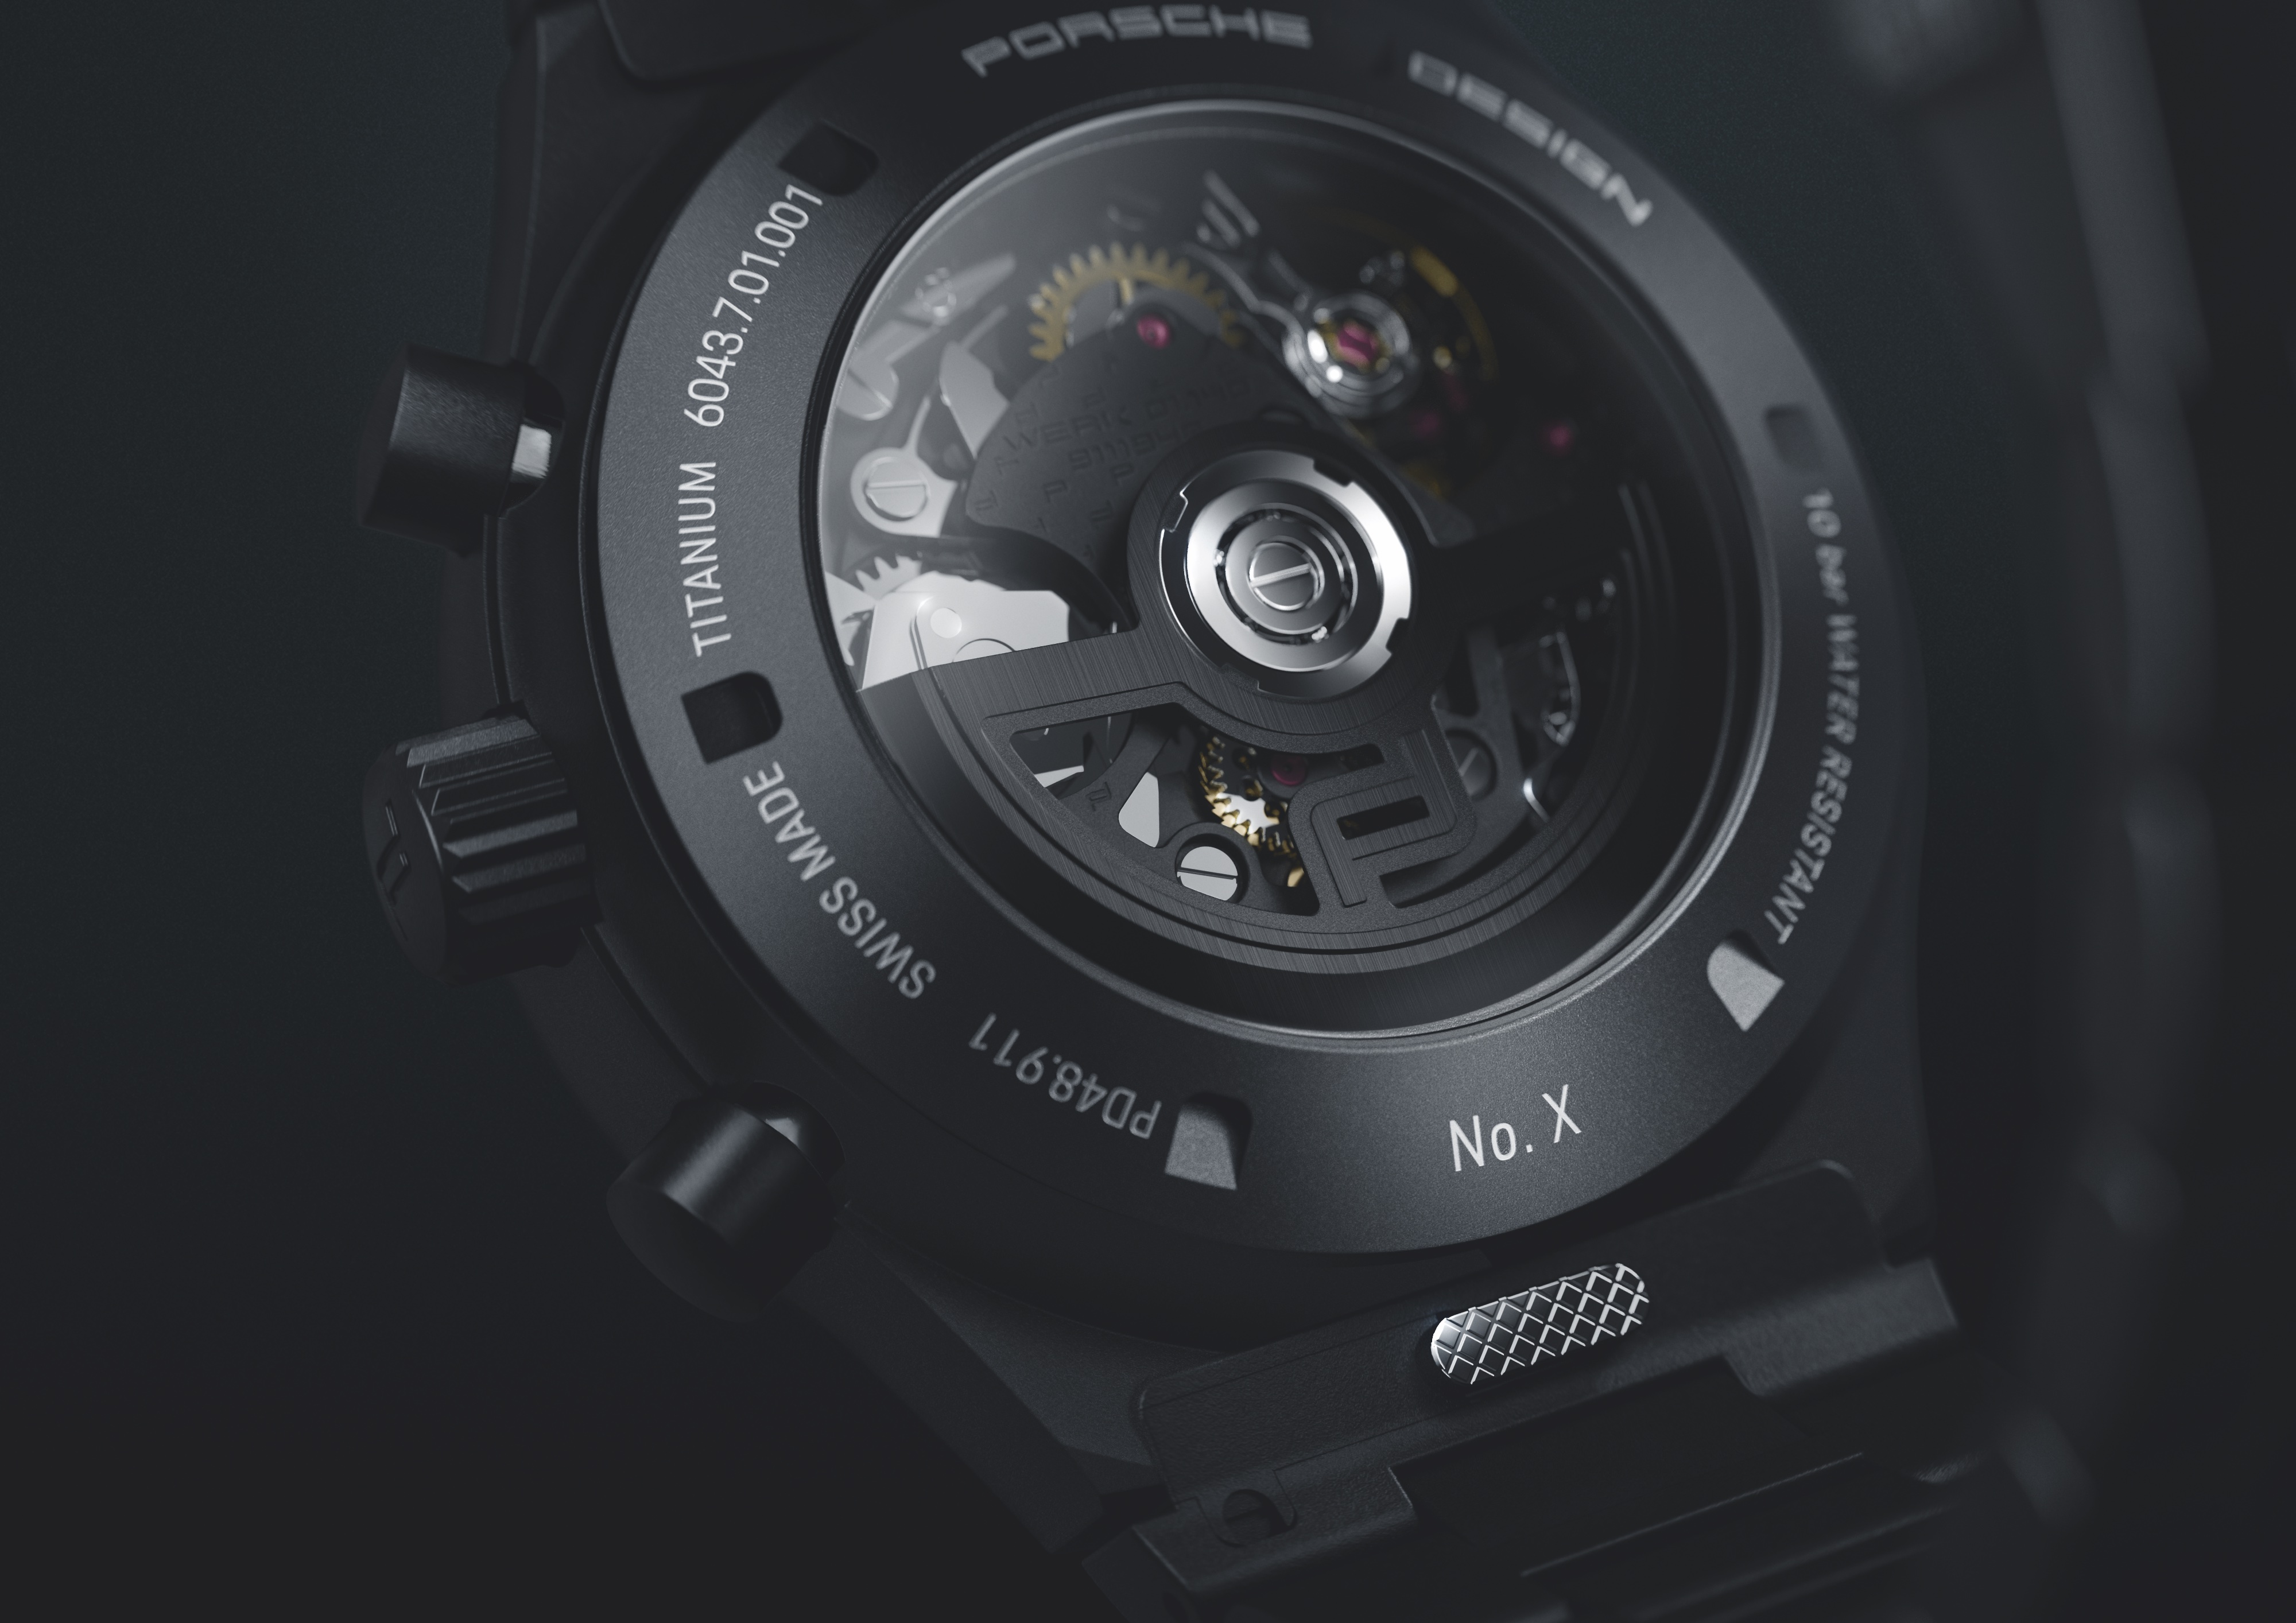 Chronograph 1 - All Black Numbered Edition